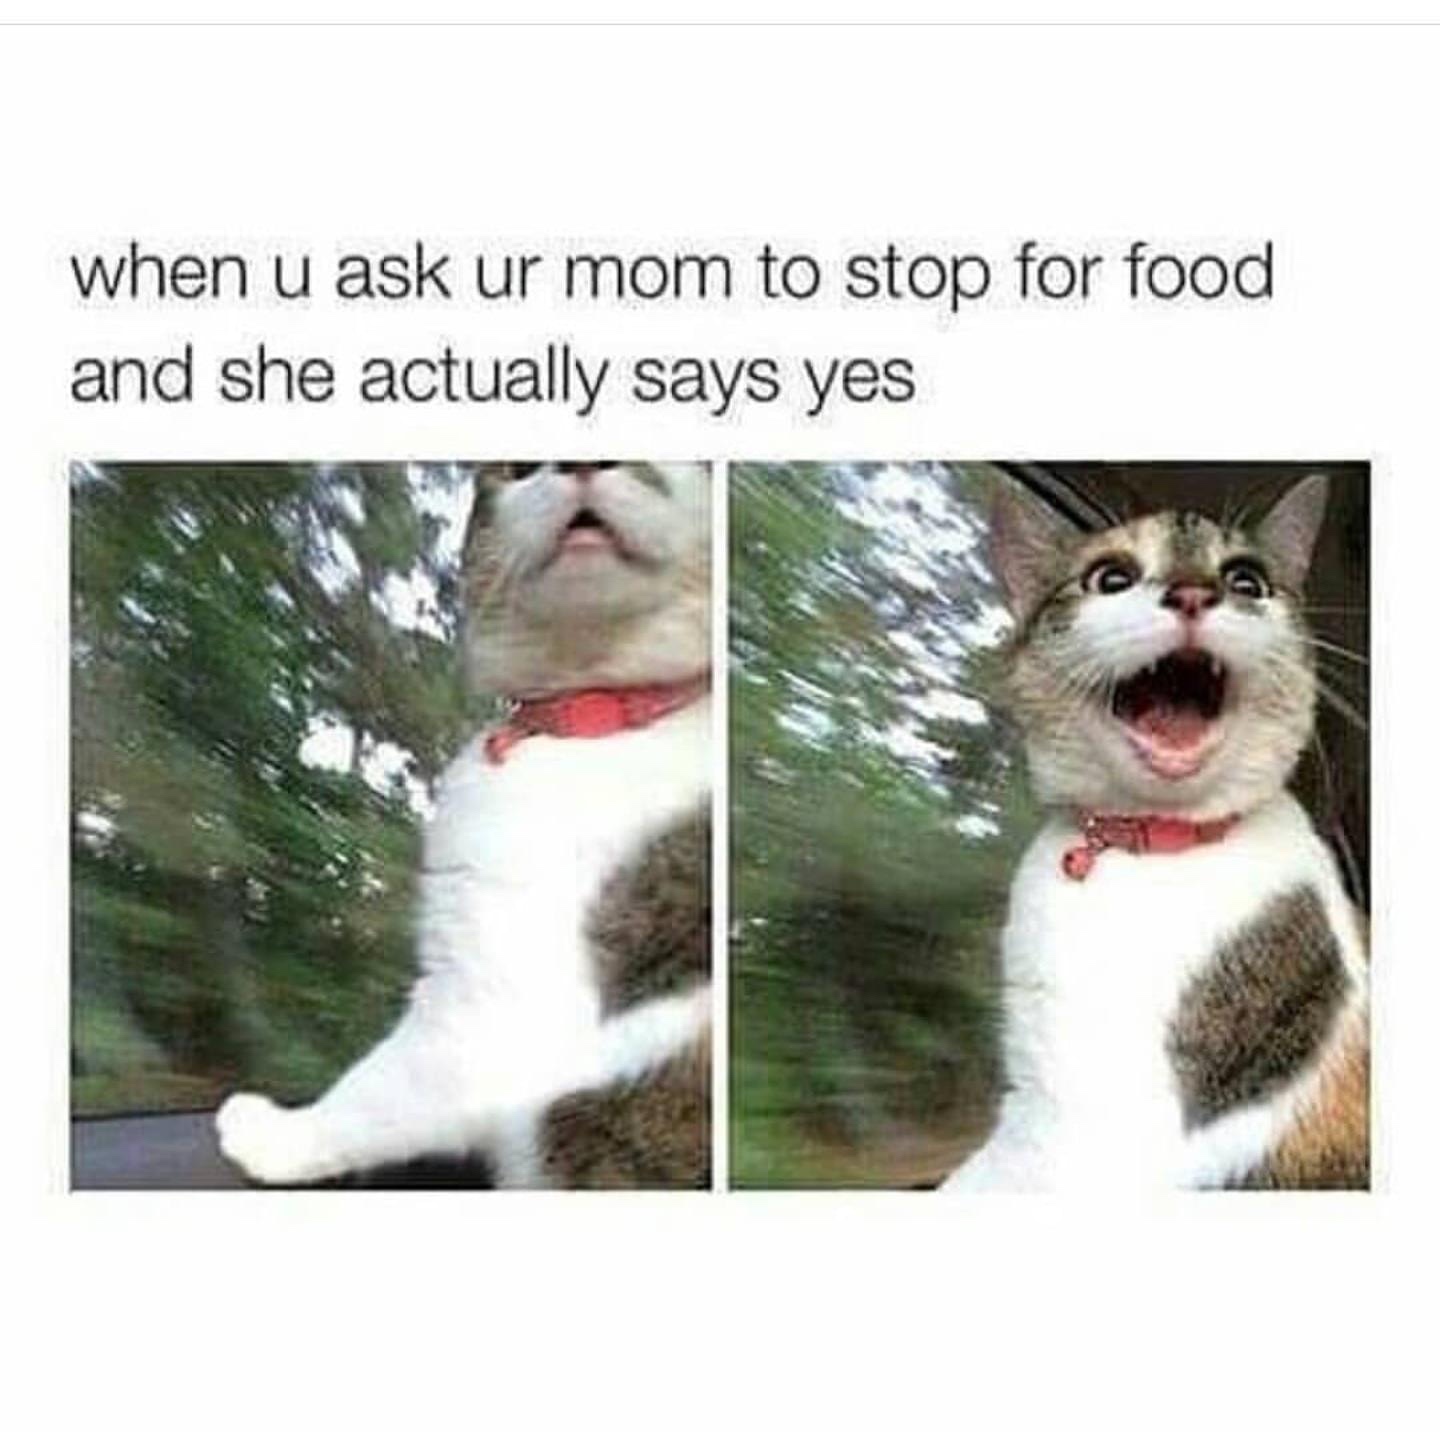 can we stop for food meme - when u ask ur mom to stop for food and she actually says yes